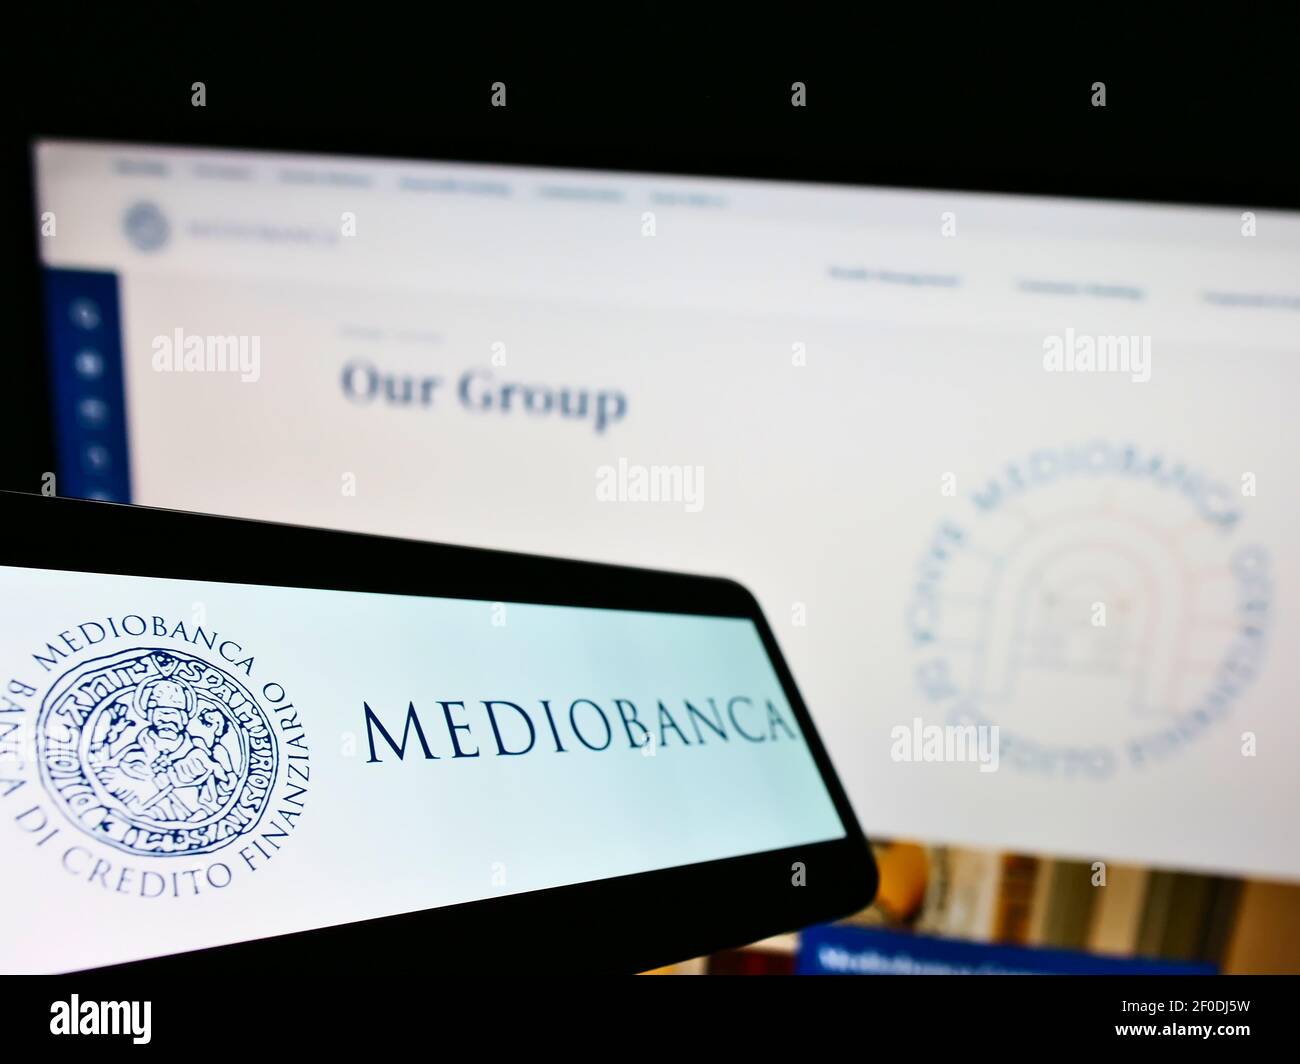 Cellphone with company logo of Italian investment bank Mediobanca S.p.A. on screen in front of website. Focus on center-left of phone display. Stock Photo